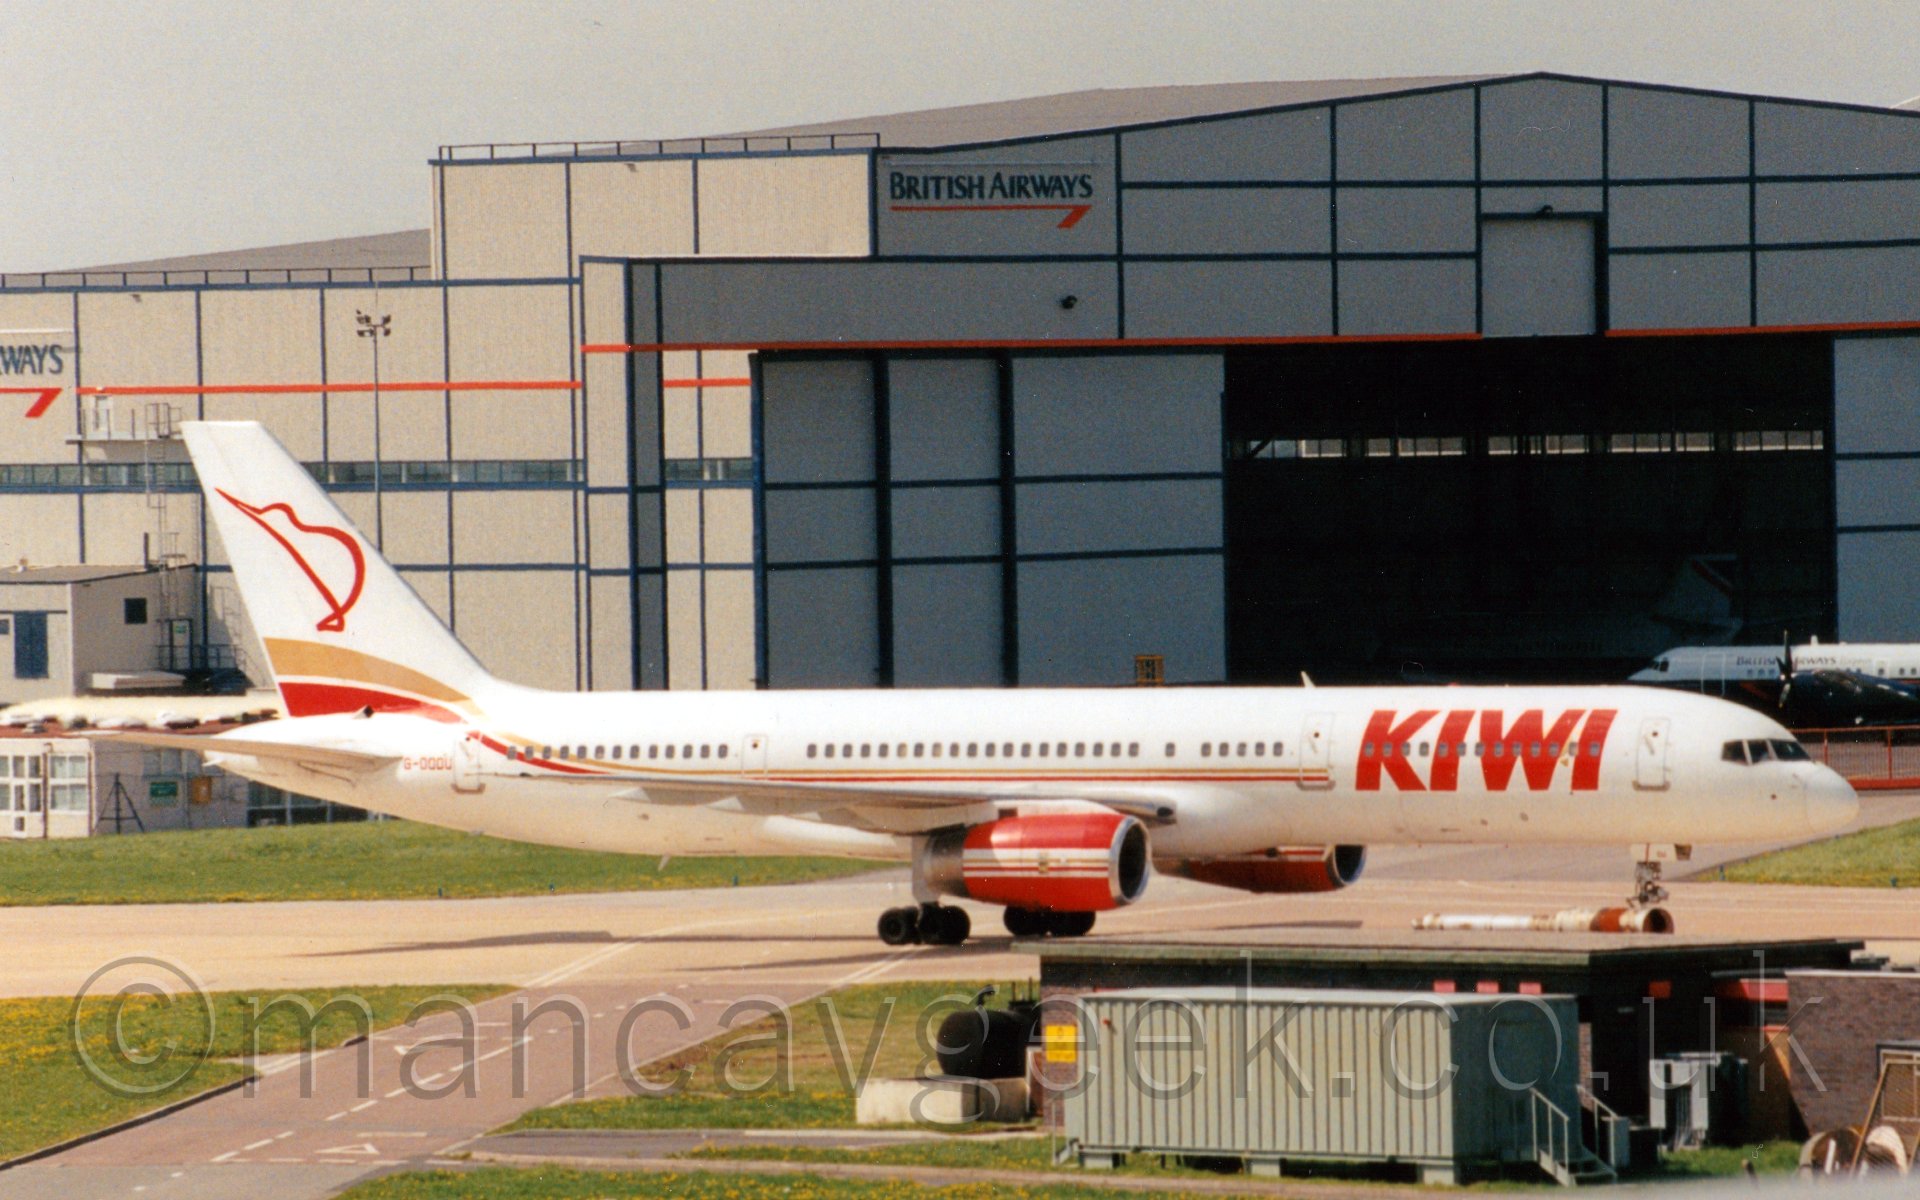 Side view of a twin engined jet airliner taxiing past a large grey hangar with it's doors open. The plane is mostly white, with a gold and red stripe running along most of the body before sweeping up into the base of the tail. There are large red "Kiwi" billboard titles on the forward fuselage, and the red outline of a kiwi (non-flying bird native to New Zealand) on the tail. the3 engines are red, with a thick white stripe through the middle, which itself has a thin gold and red stripe, as on the fuselage.